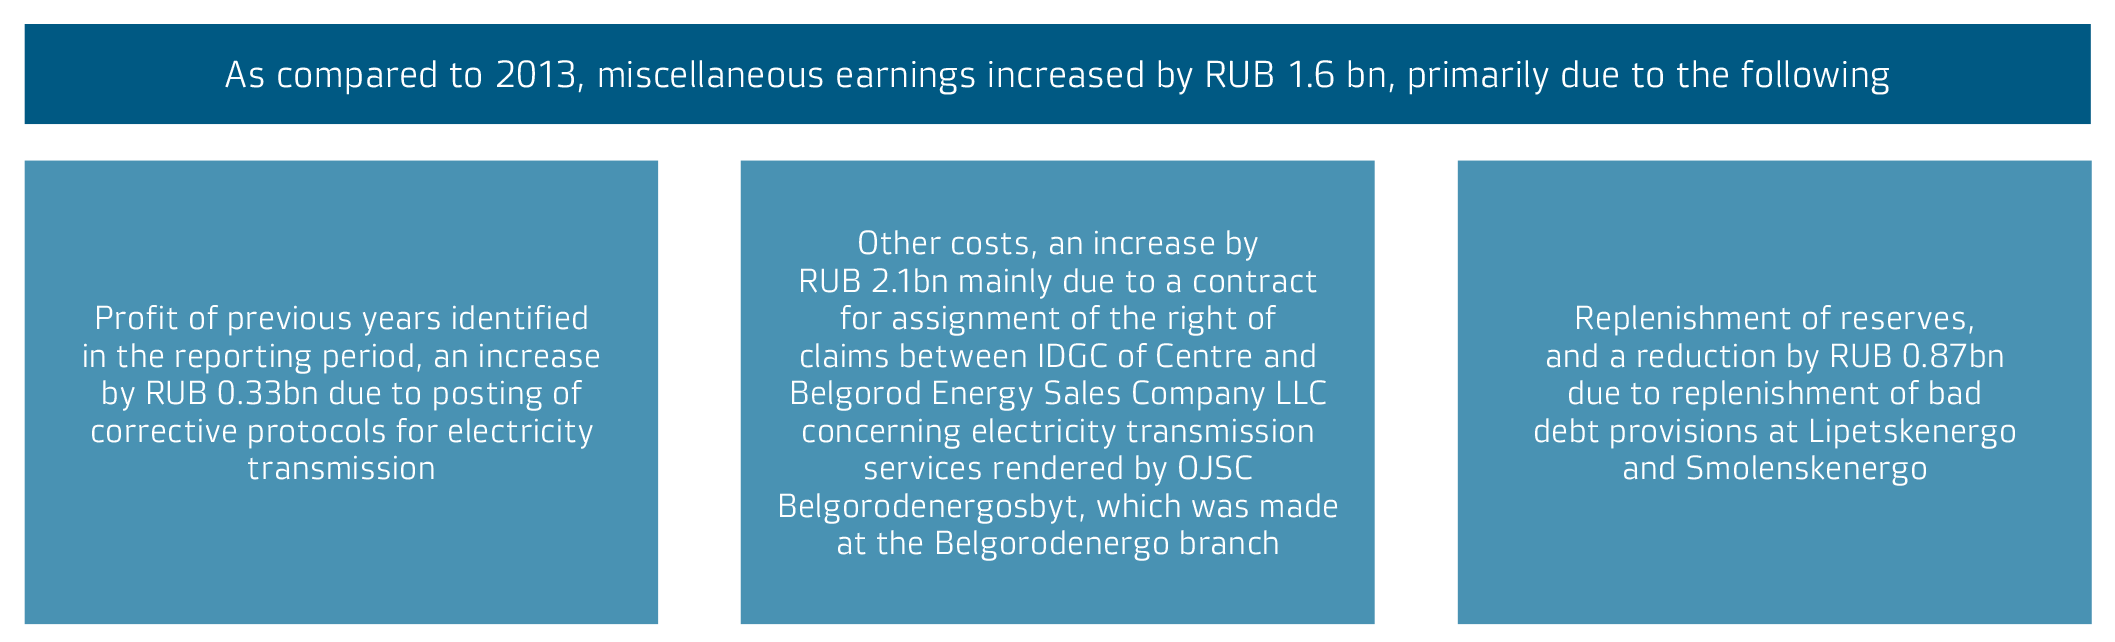 As compared to 2013, miscellaneous earnings increased by RUB 1.6 bn, primarily due to the following